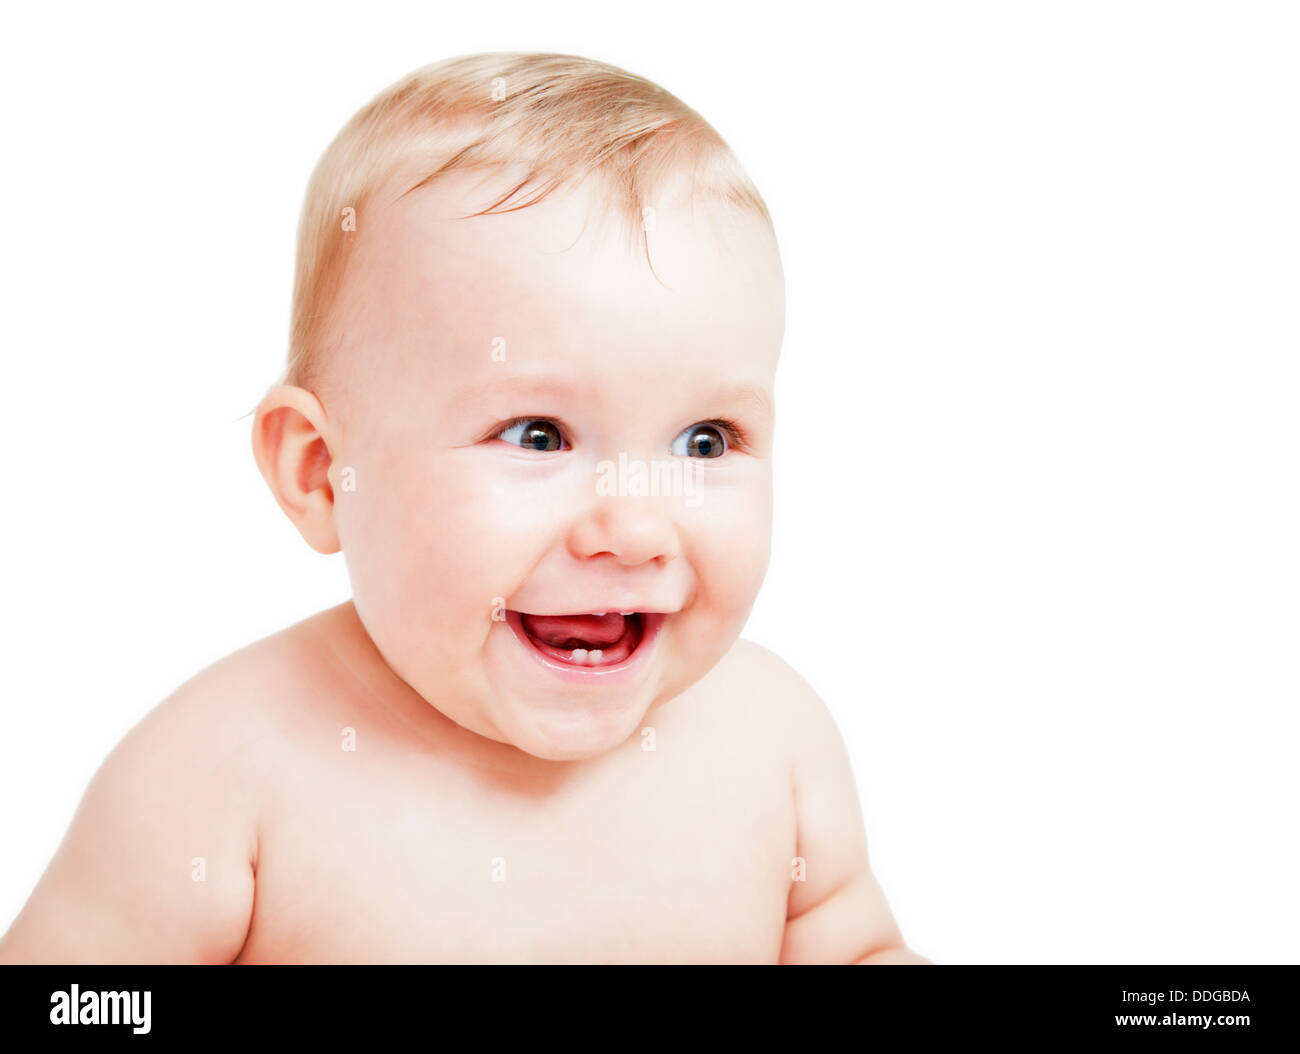 Cute happy baby smiling / laughing Stock Photo